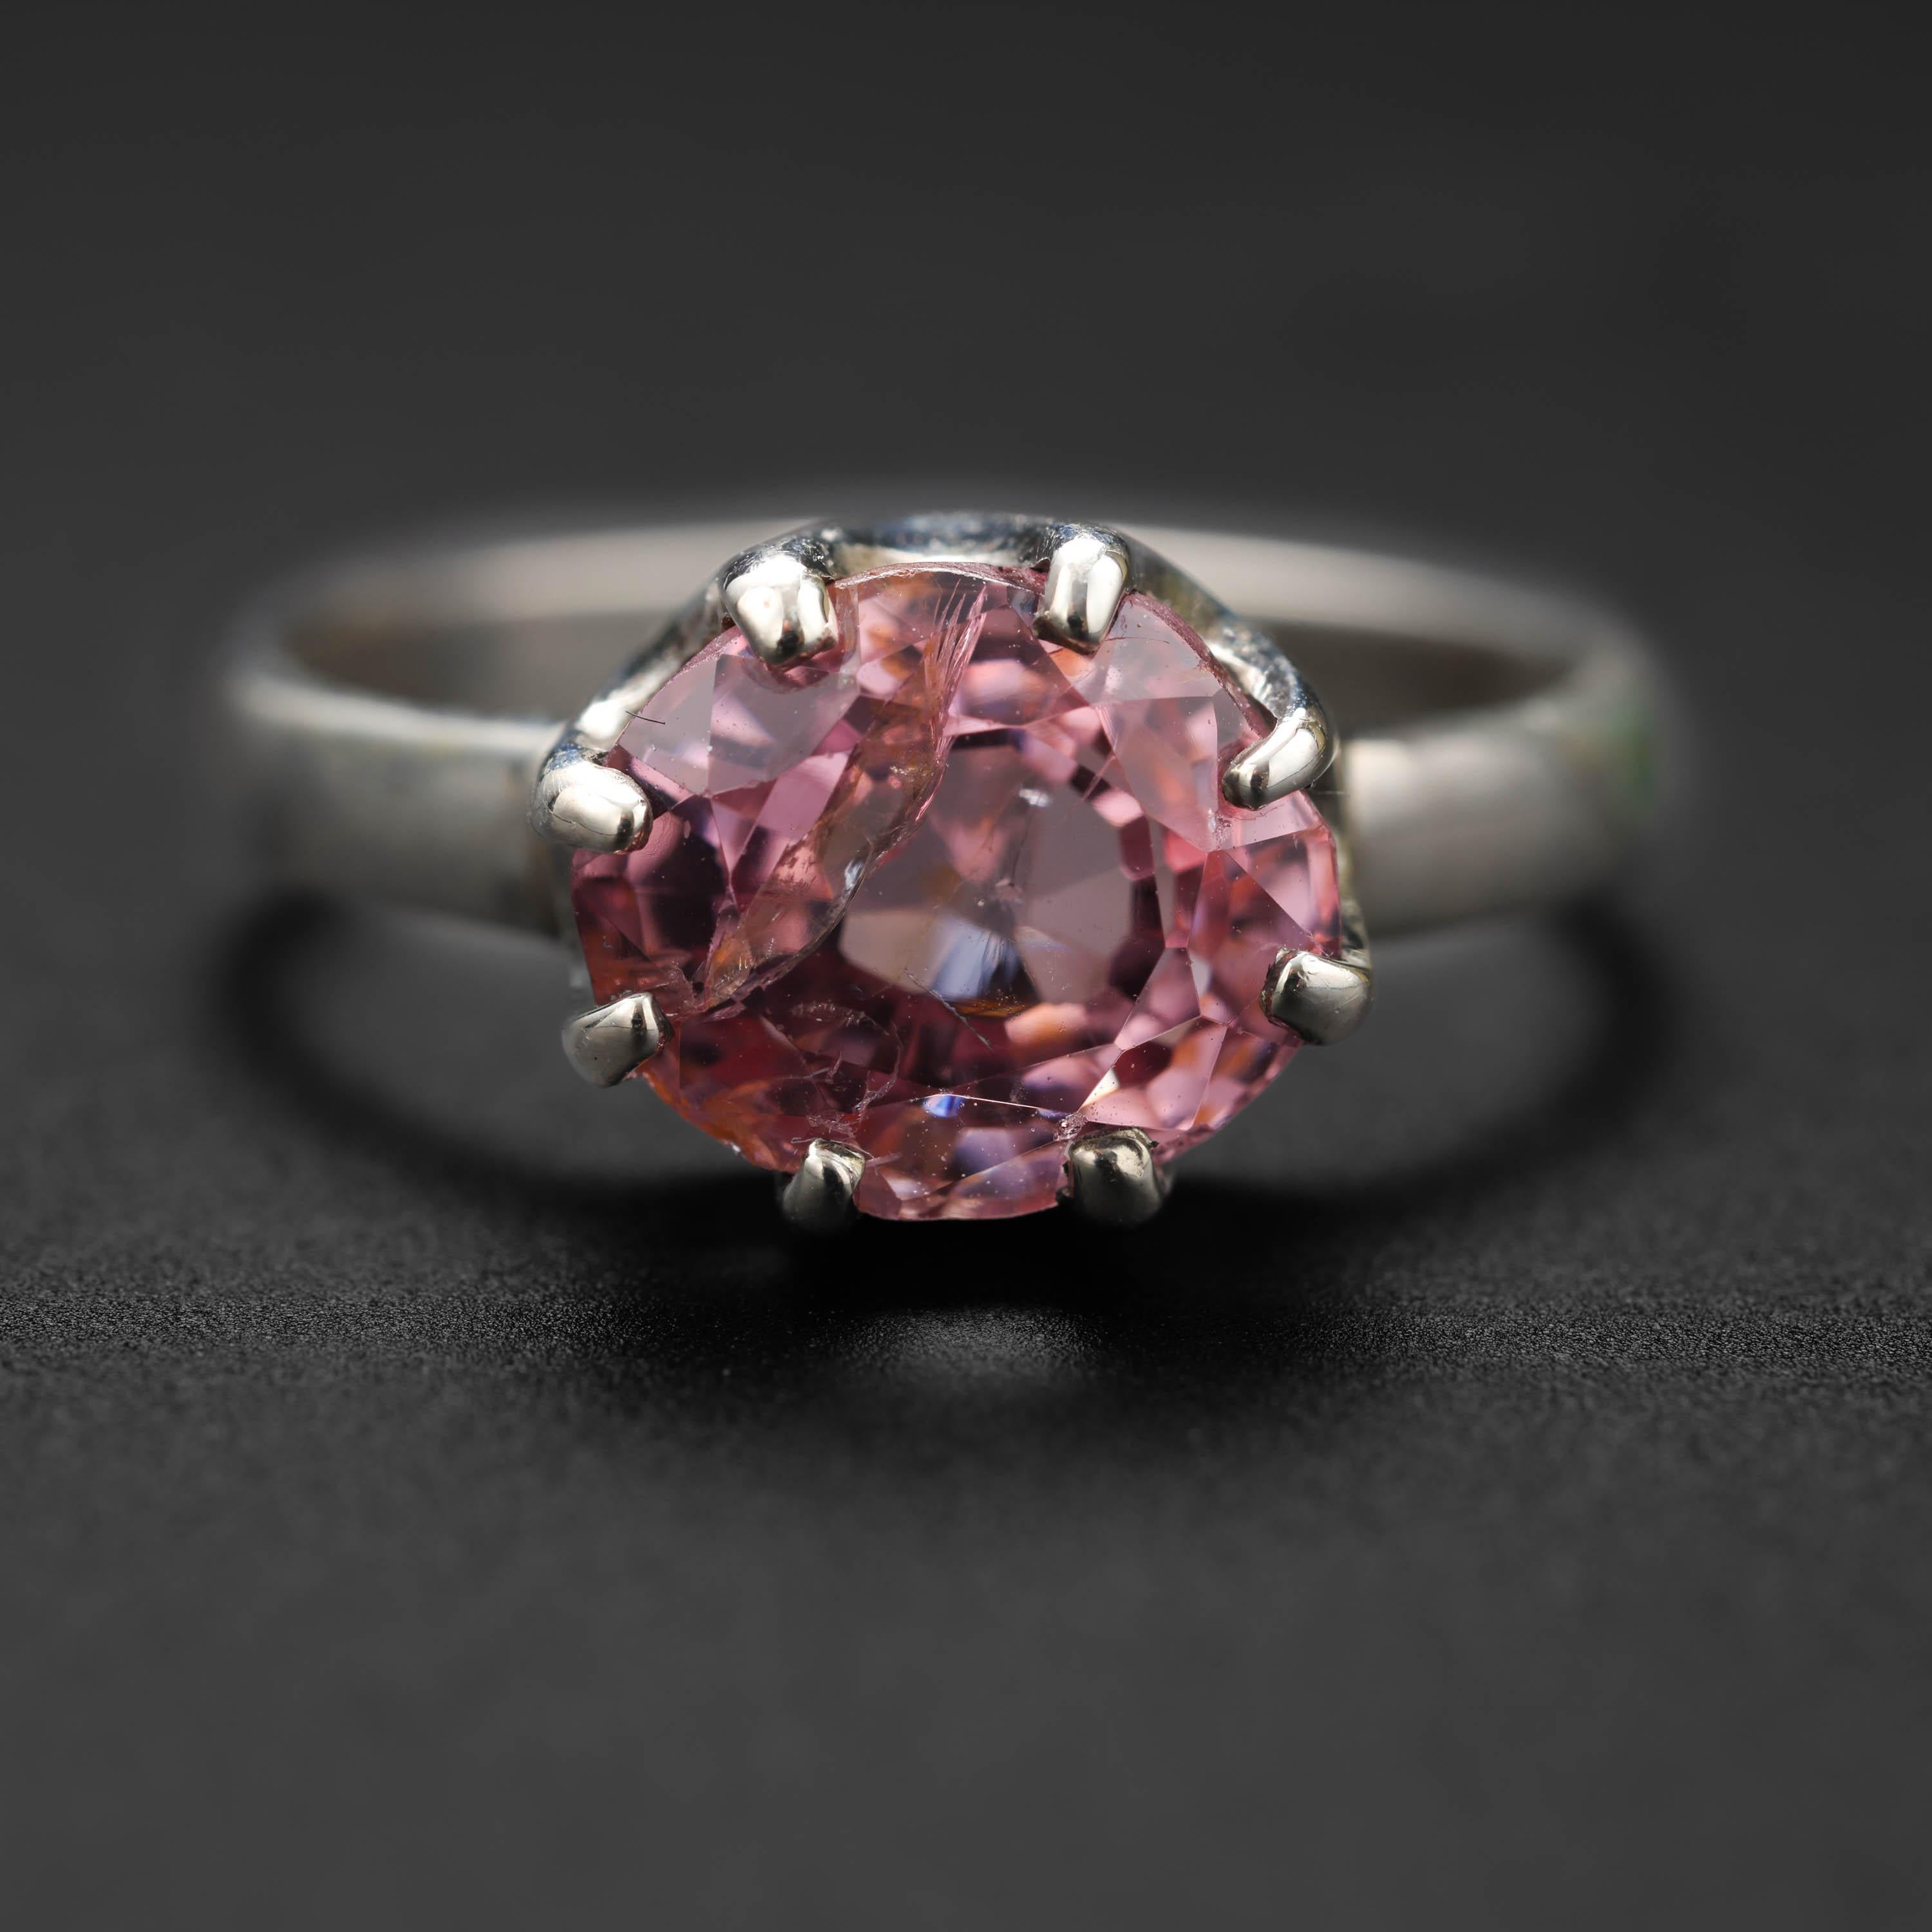 An approximately 2.81 carat oval-cut spinel the color of the finest Padparadscha sapphire is held aloft within the prongs of a formal coronet setting in this rare and magnificent Danish Modern silver ring dating to the 1970s. 

Nearly as hard and